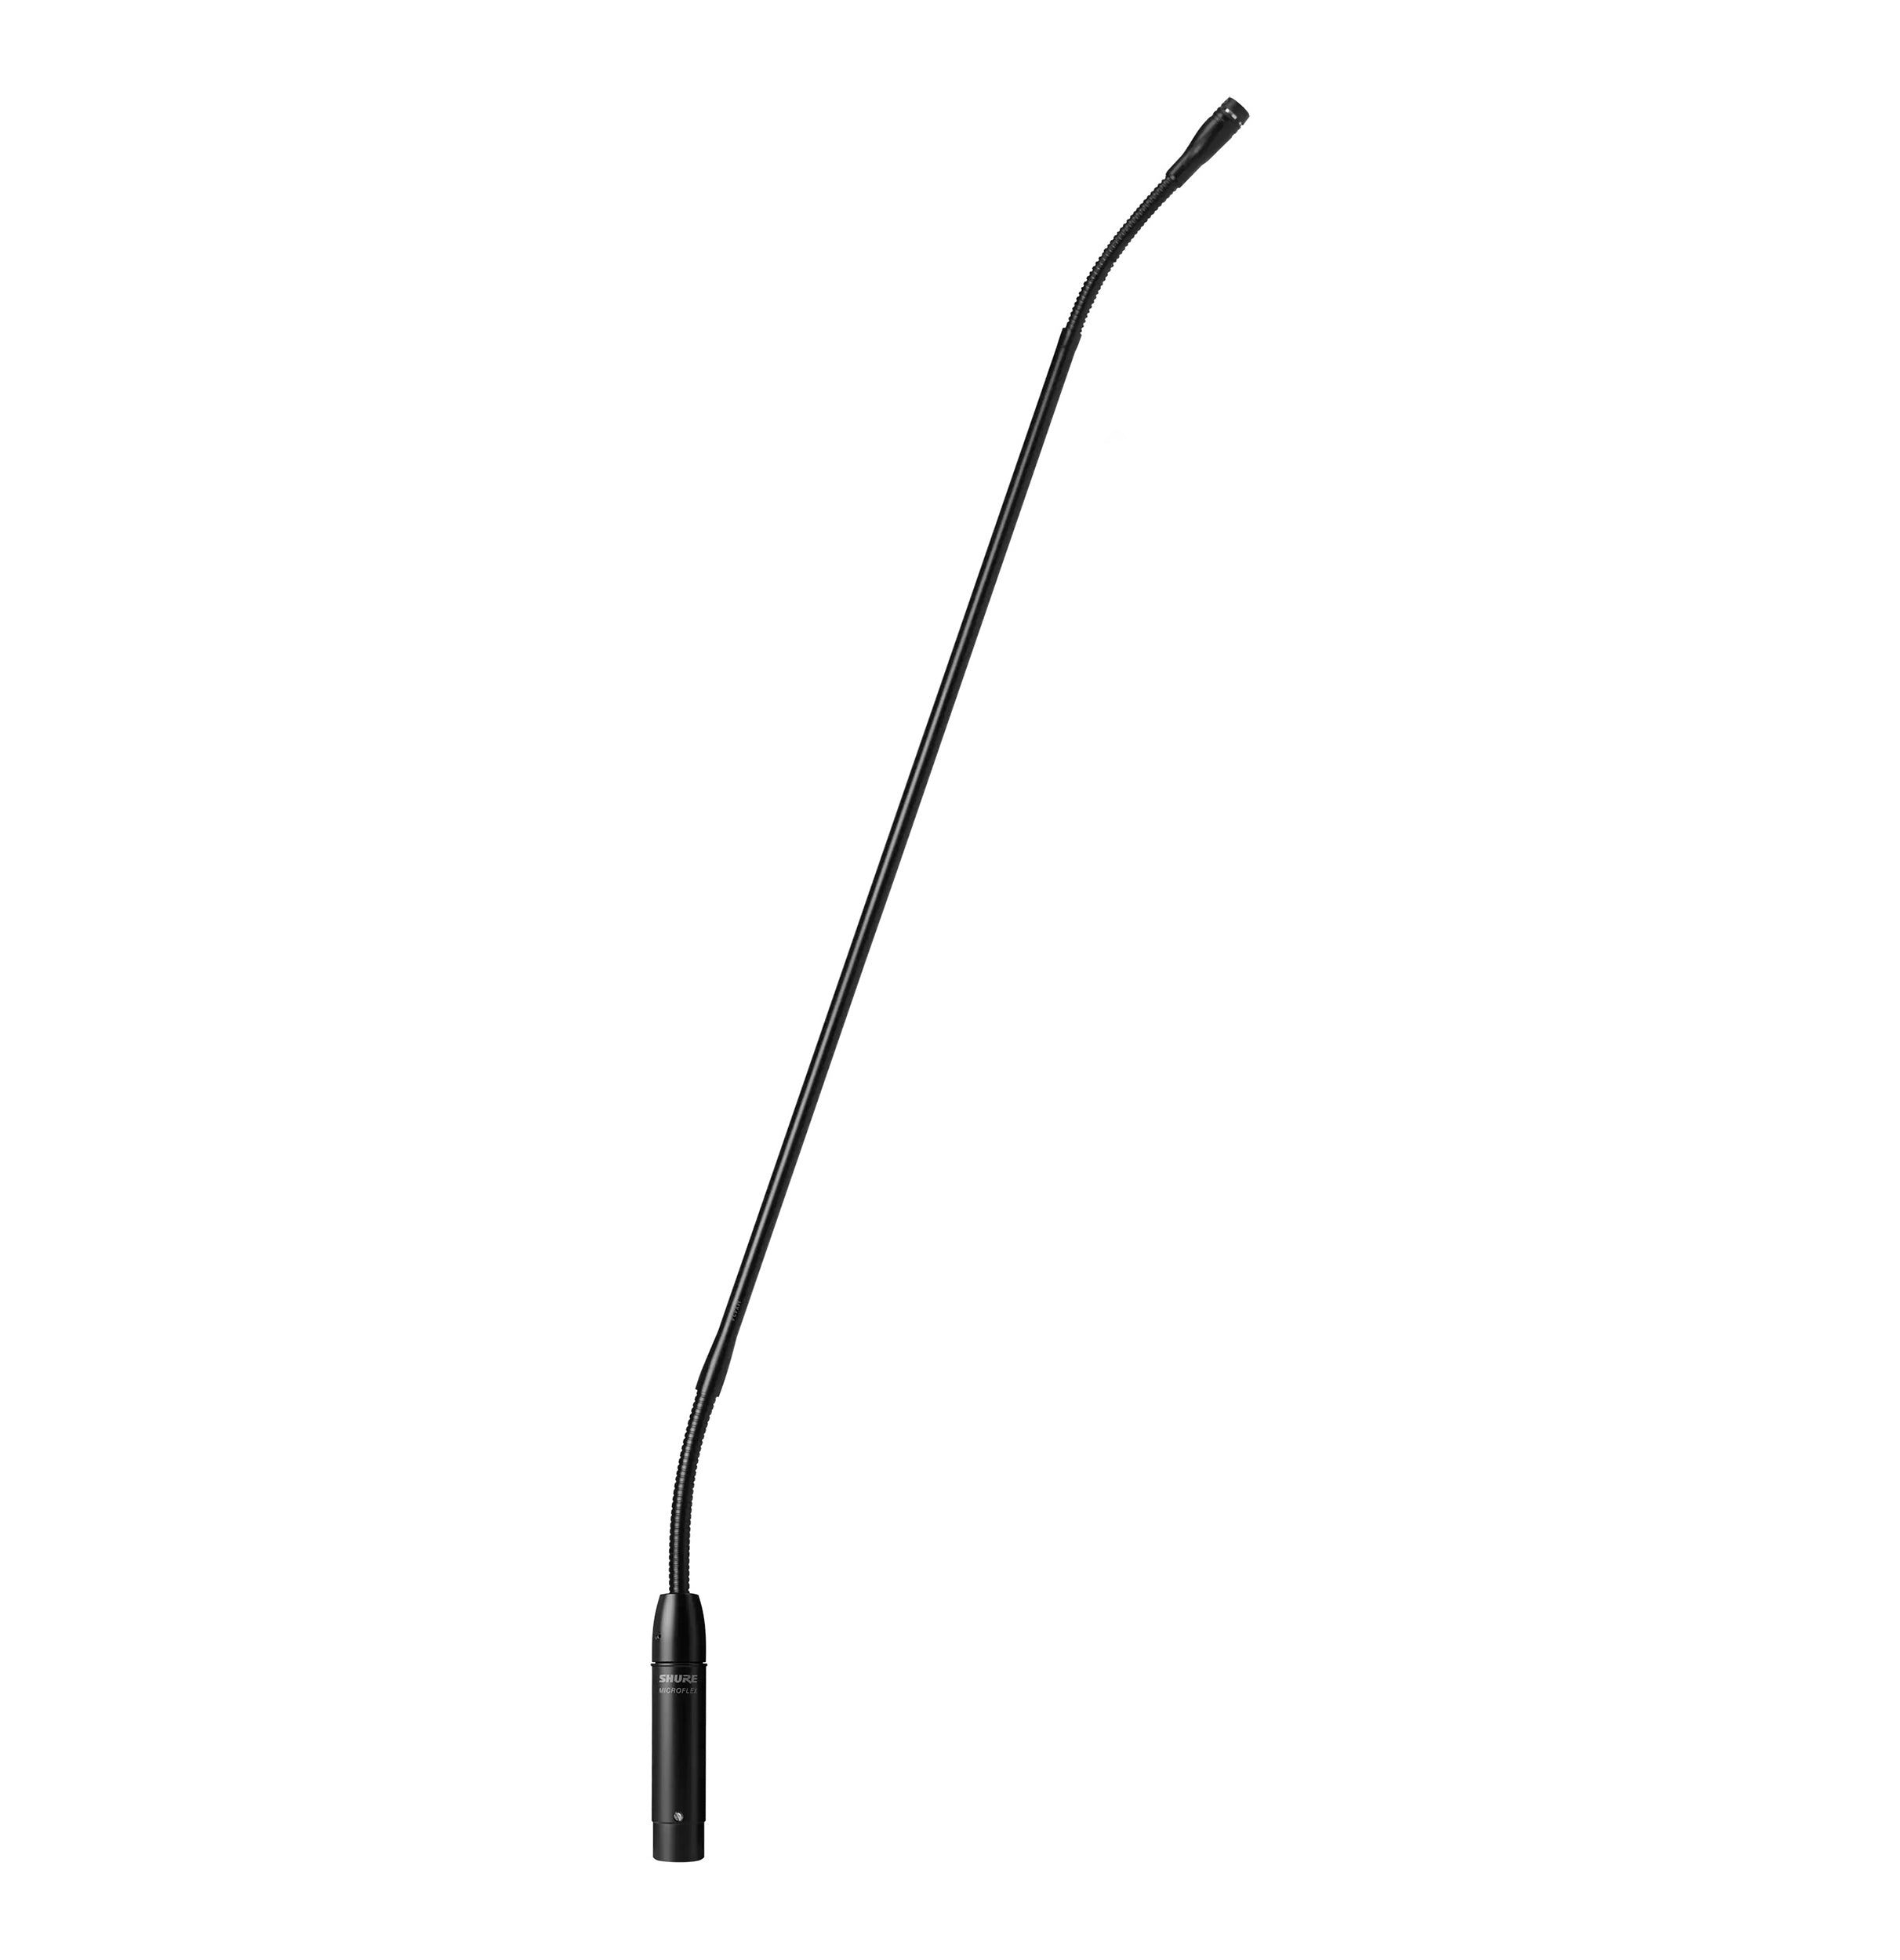 Shure MX424/C, 24-Inch Micro Flex Cardioid Gooseneck Condenser Microphone with Preamp by Shure